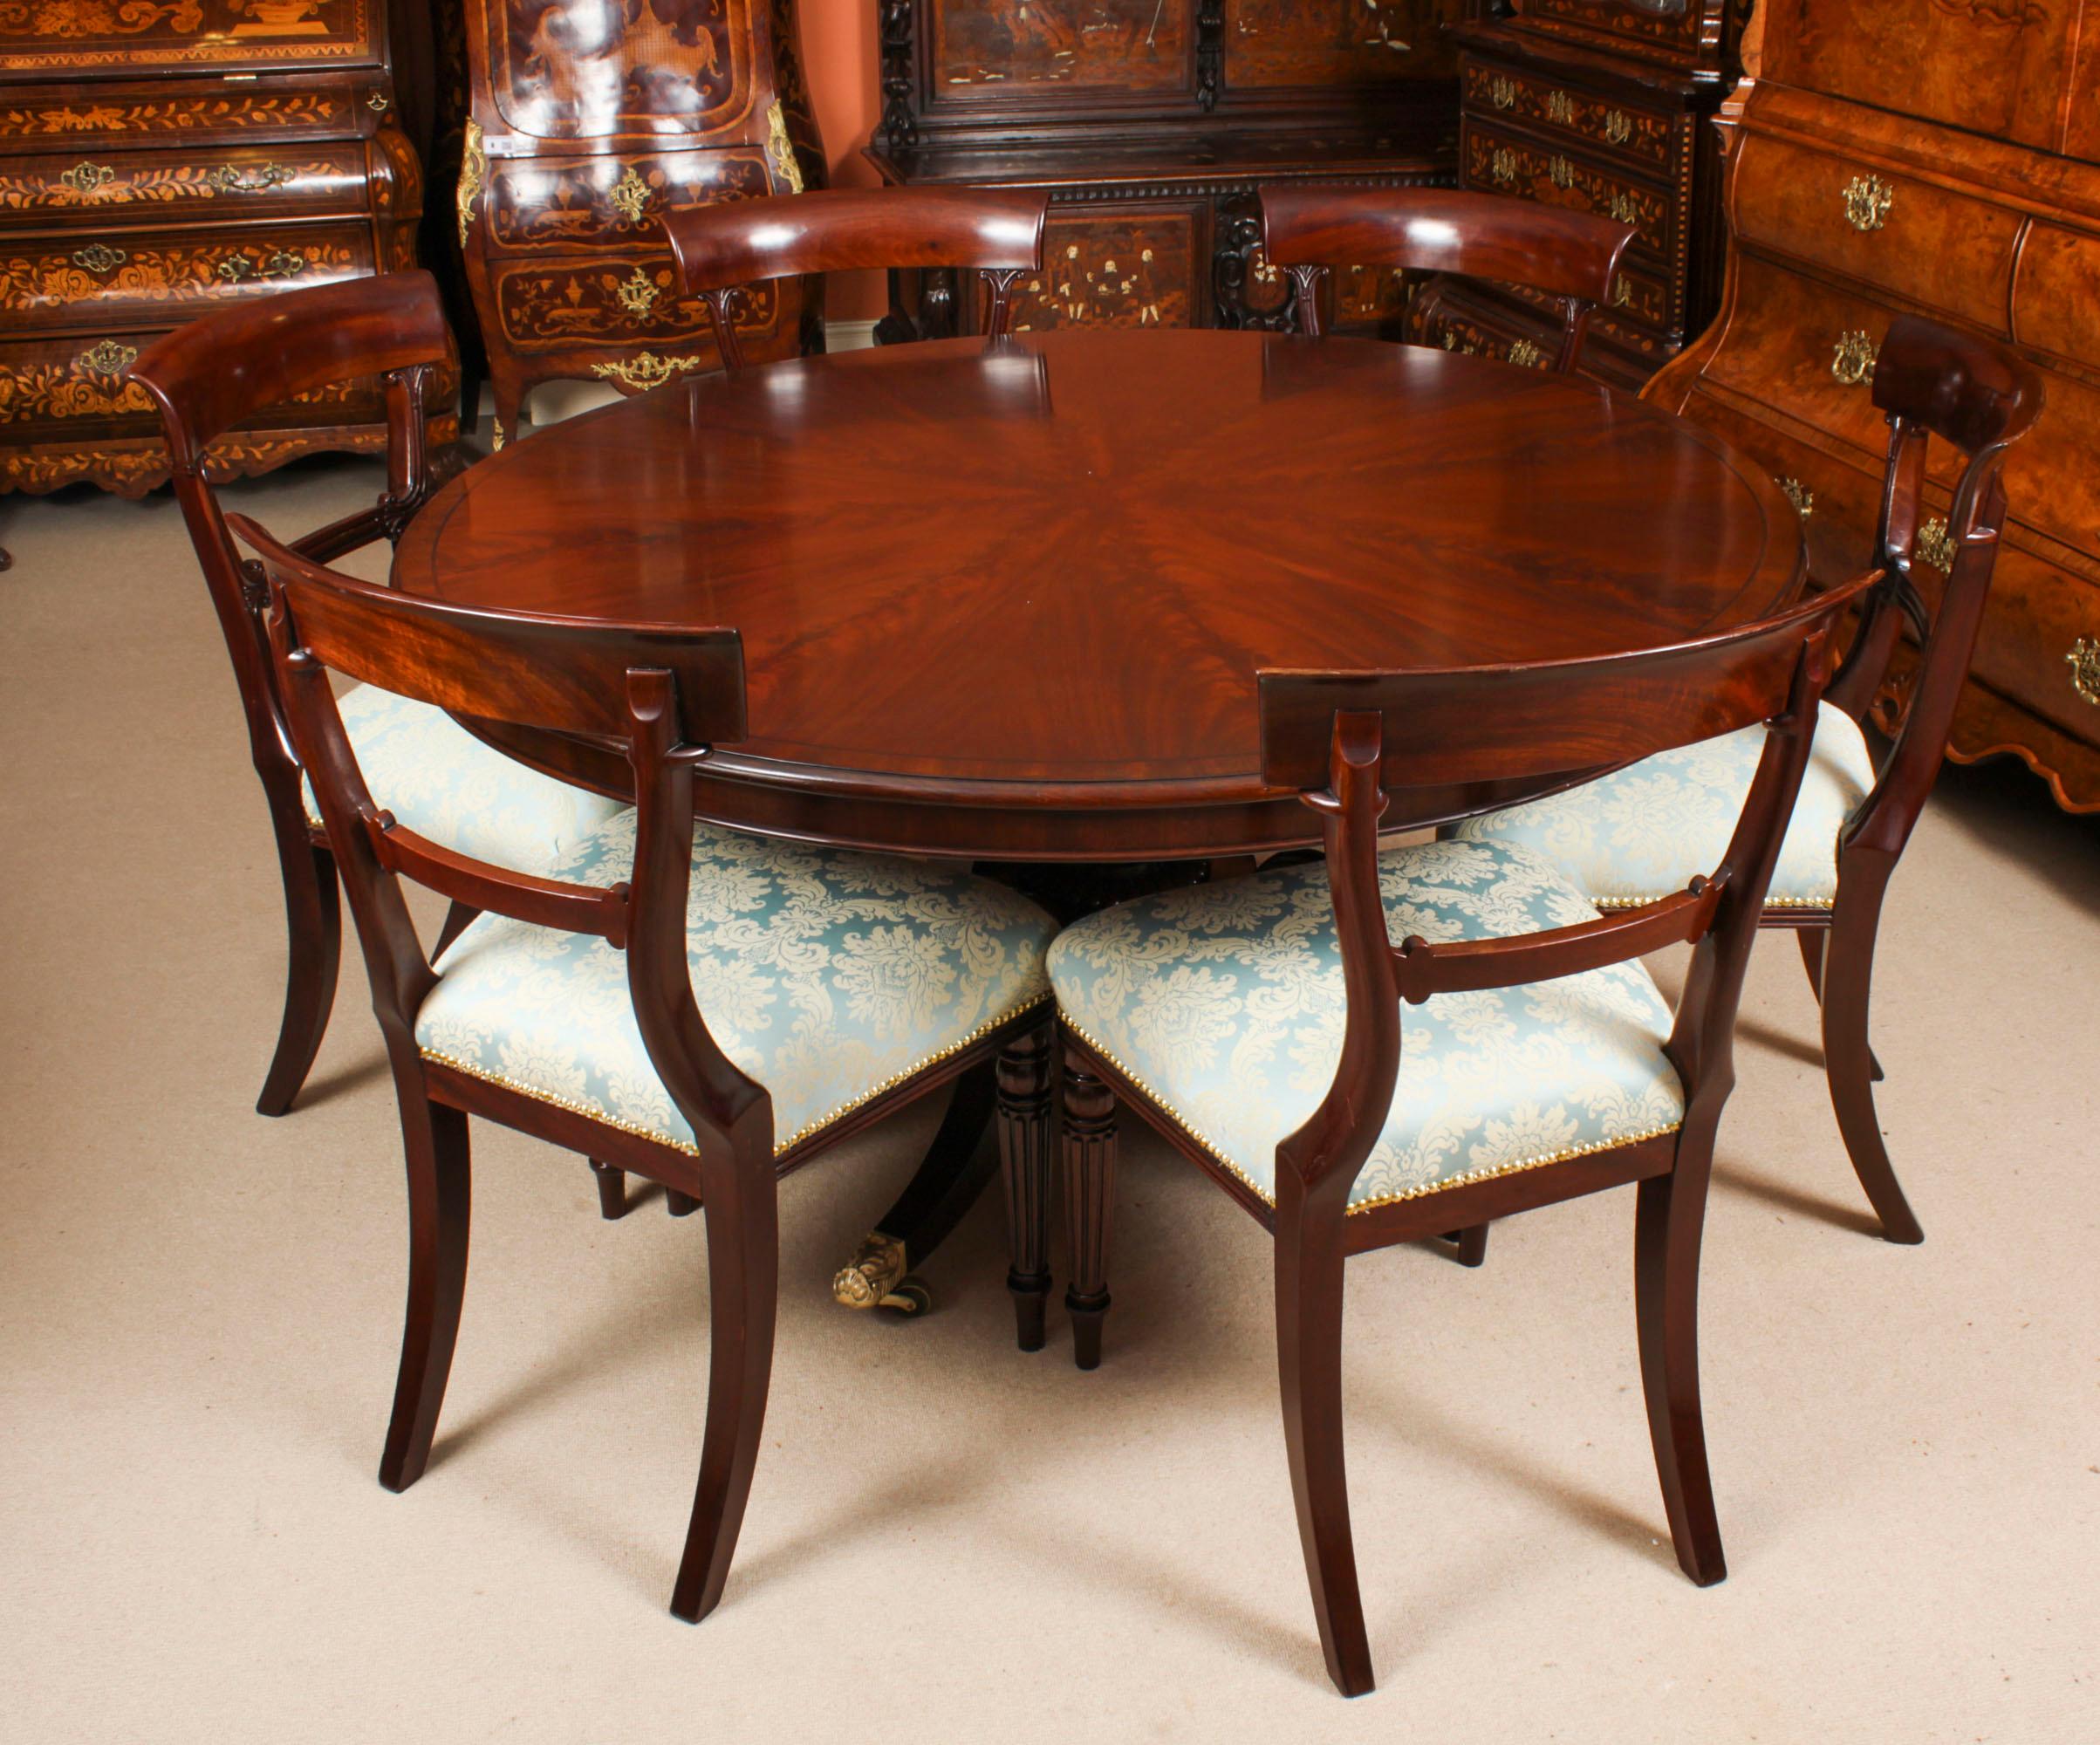 Antique William IV Loo Breakfast Dining Table c.1830 19th C In Good Condition For Sale In London, GB